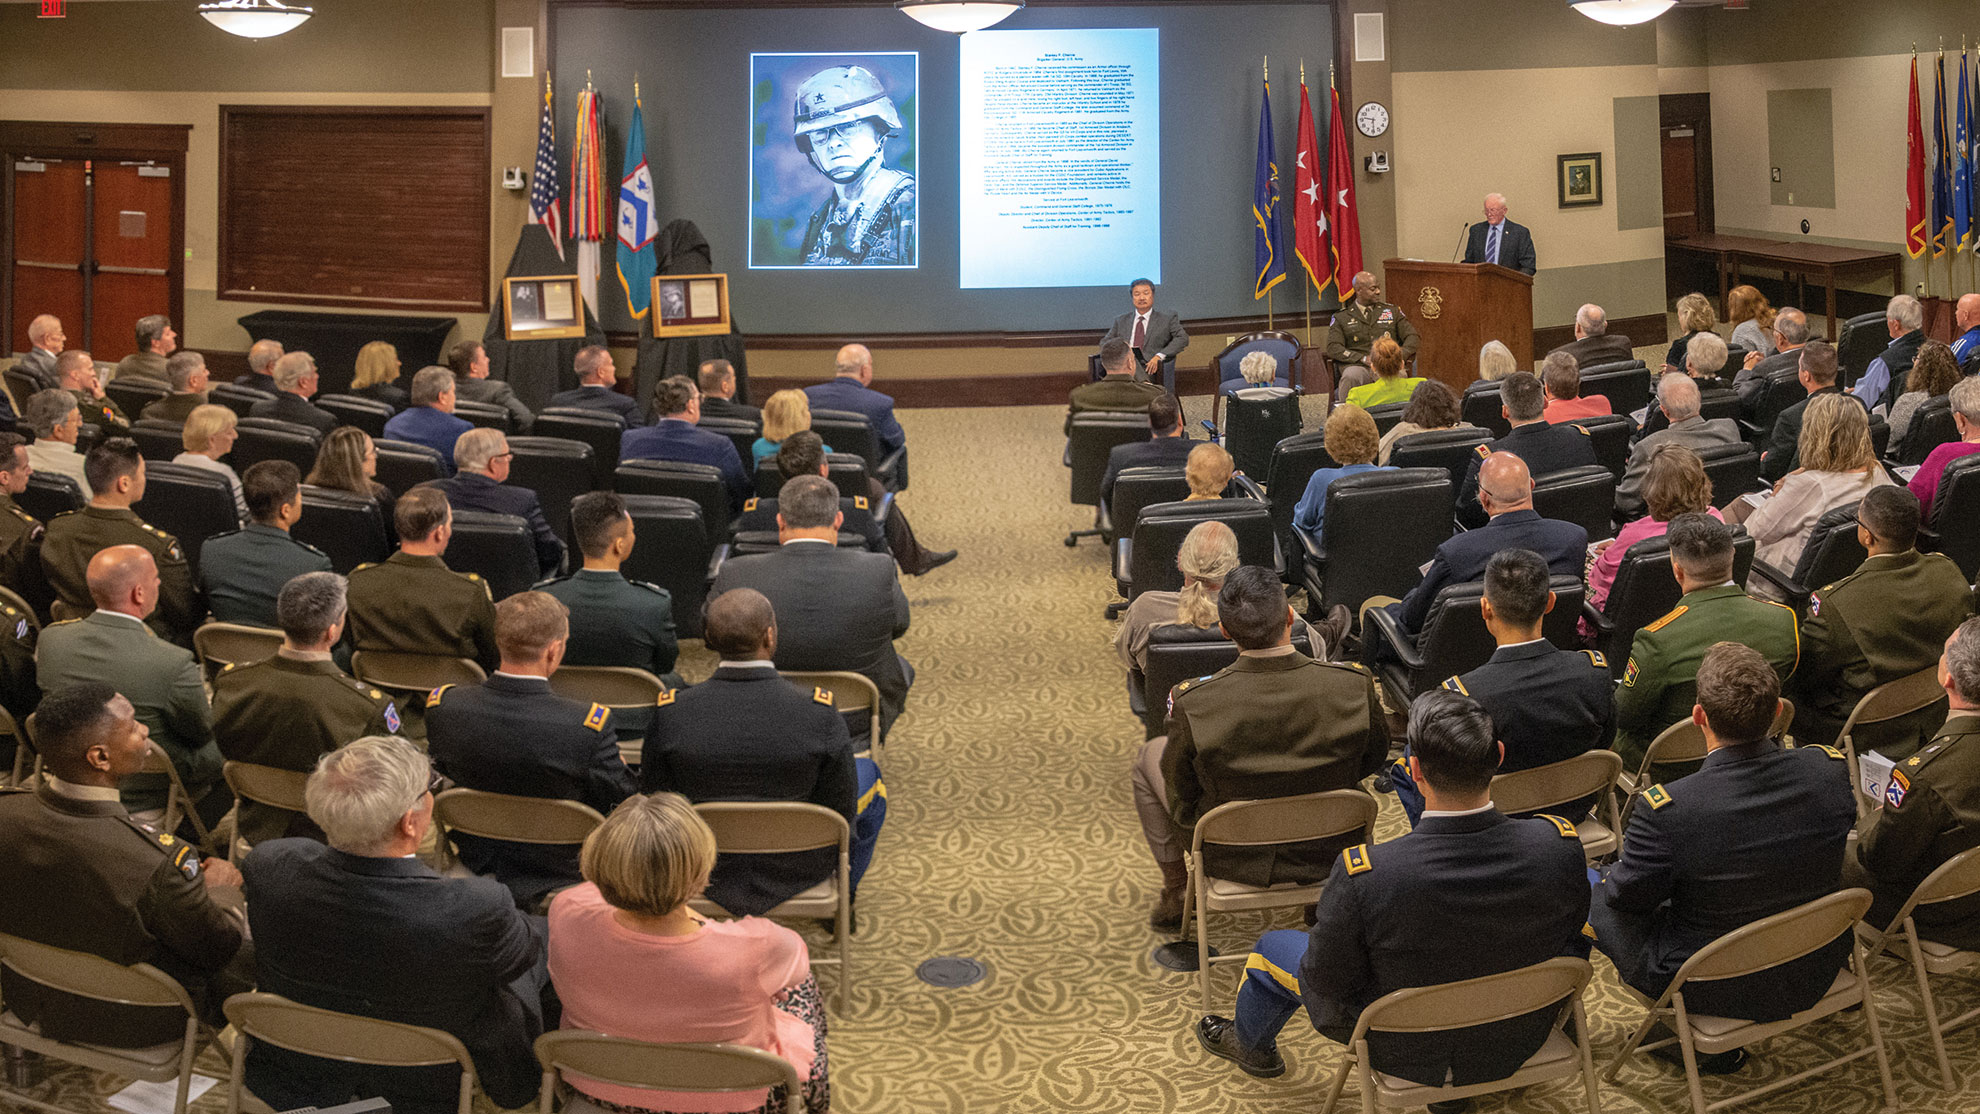 Brig. Gen. (Retired) Stanley Cherrie speaks after being inducted into the Fort Leavenworth Hall of Fame May 16 in the Arnold Conference Room of the Lewis and Clark Center.